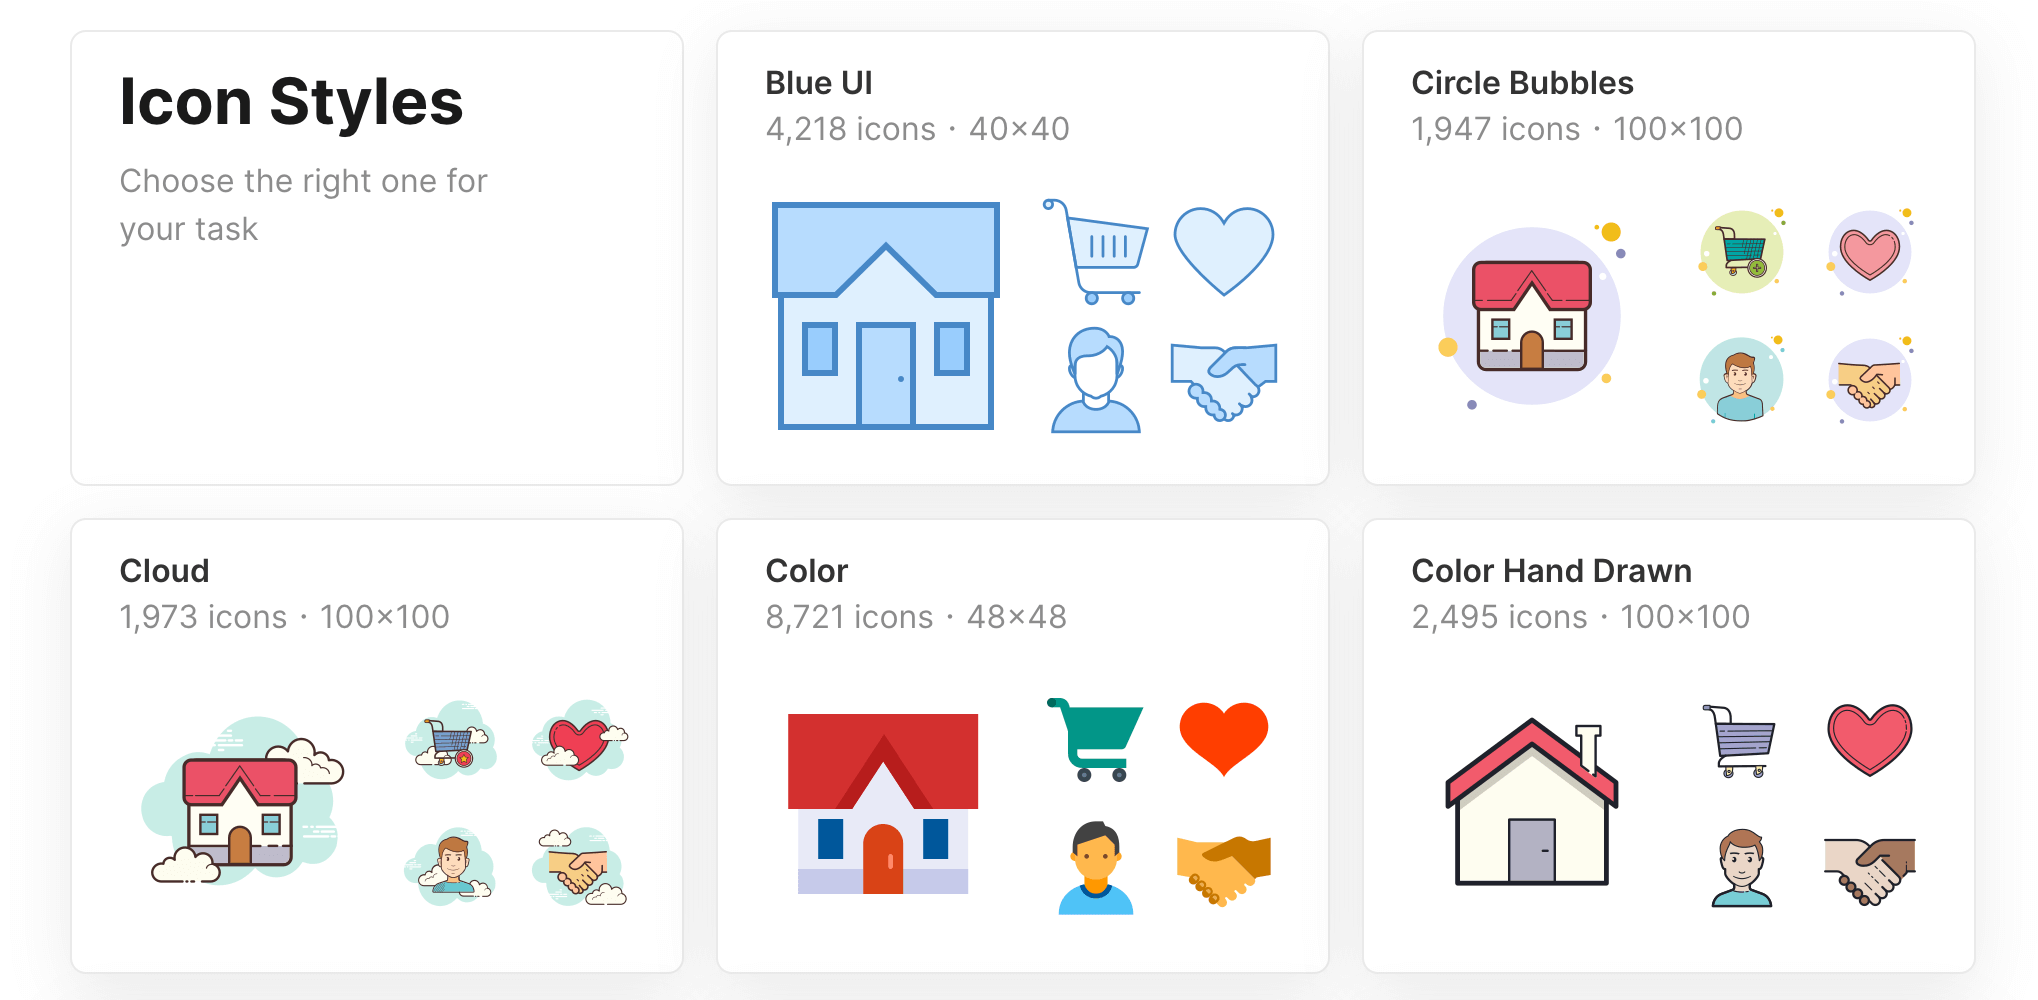 Free icon sets from Icons8.